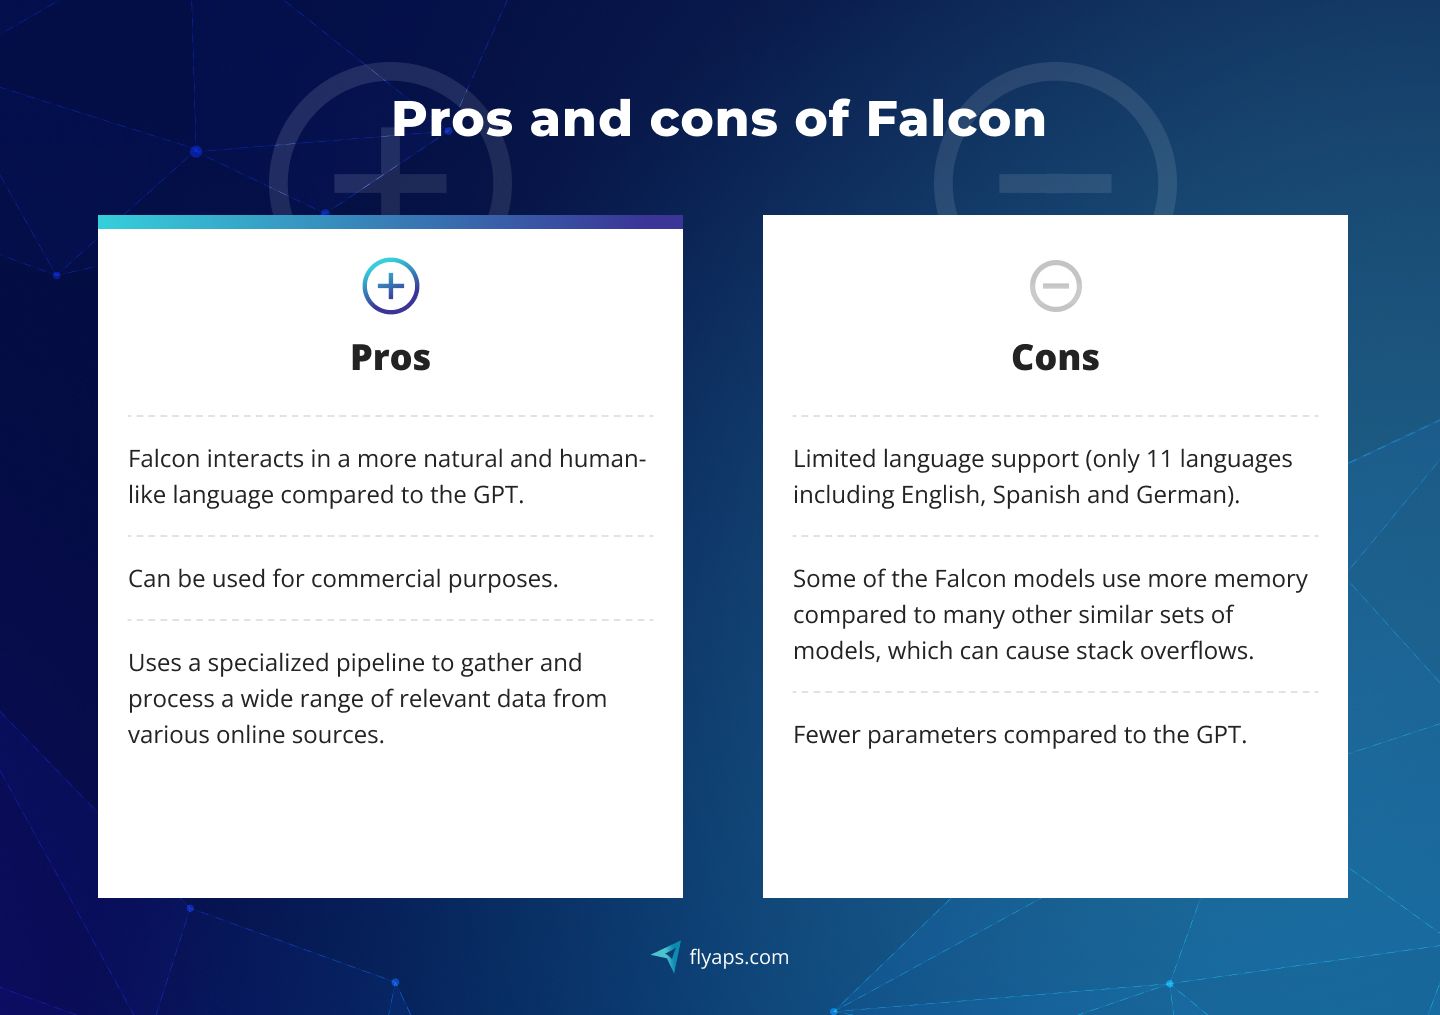 Pros and cons of Falcon